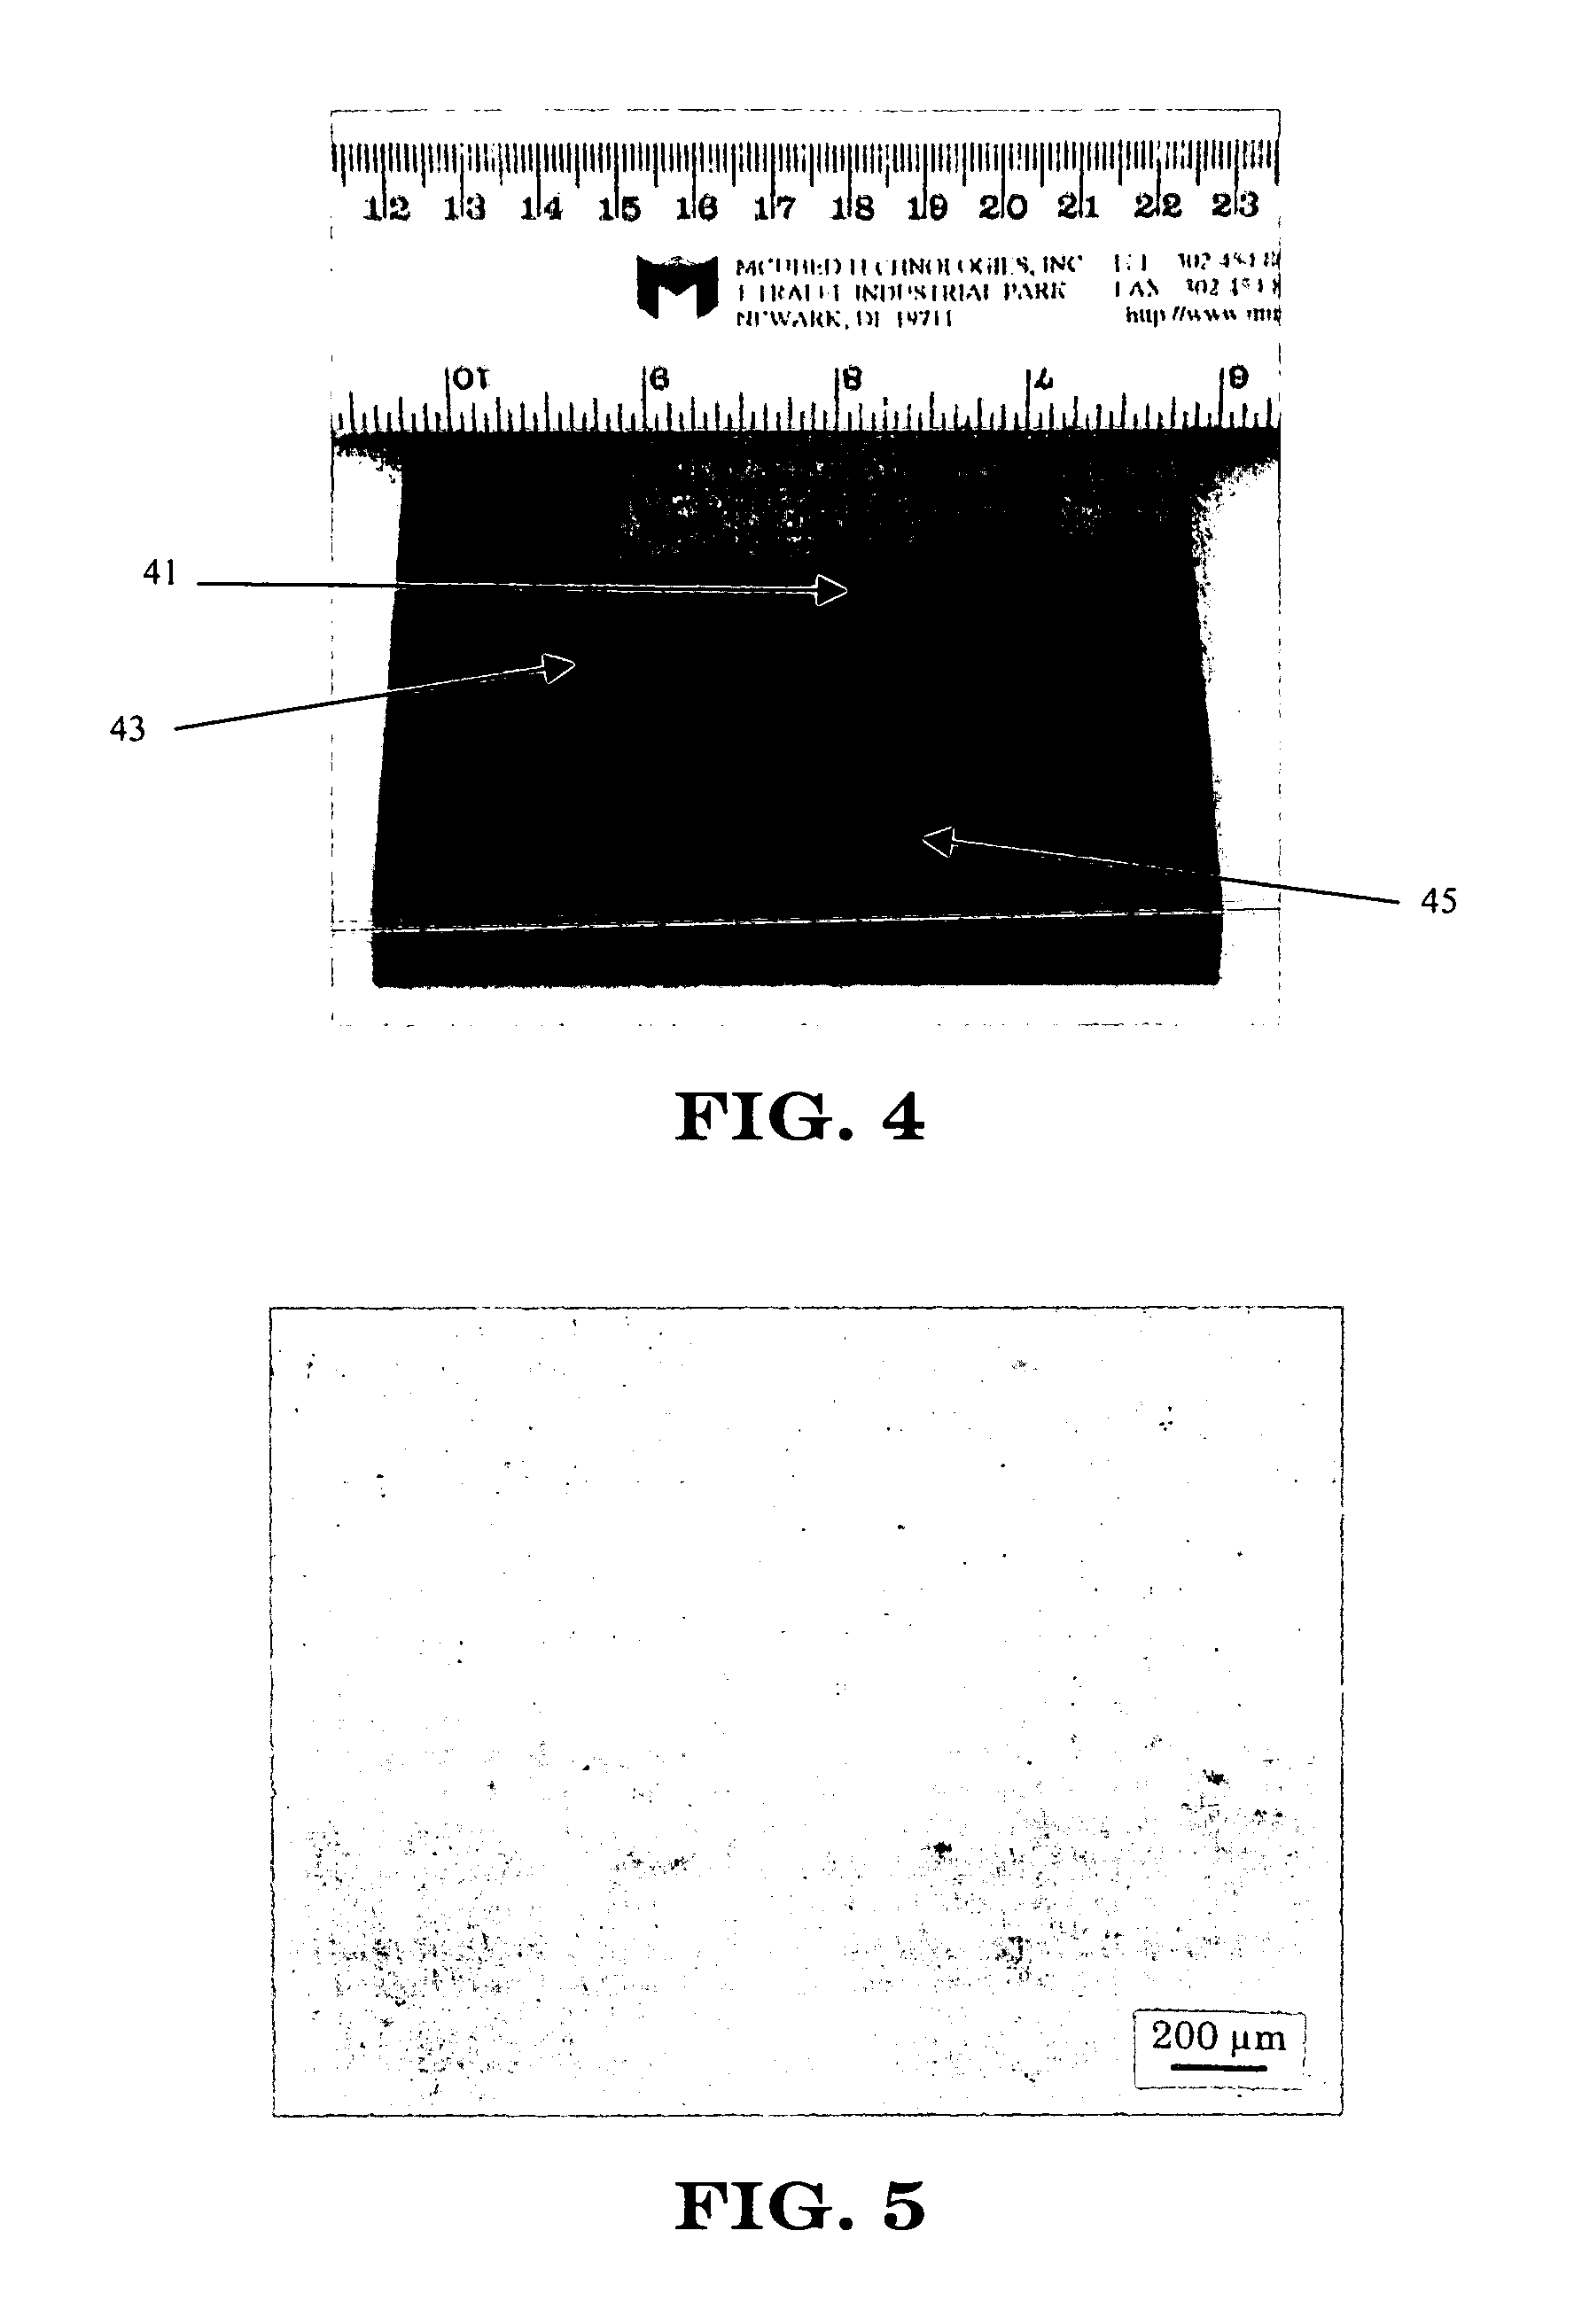 Method for brazing ceramic-containing bodies, and articles made thereby